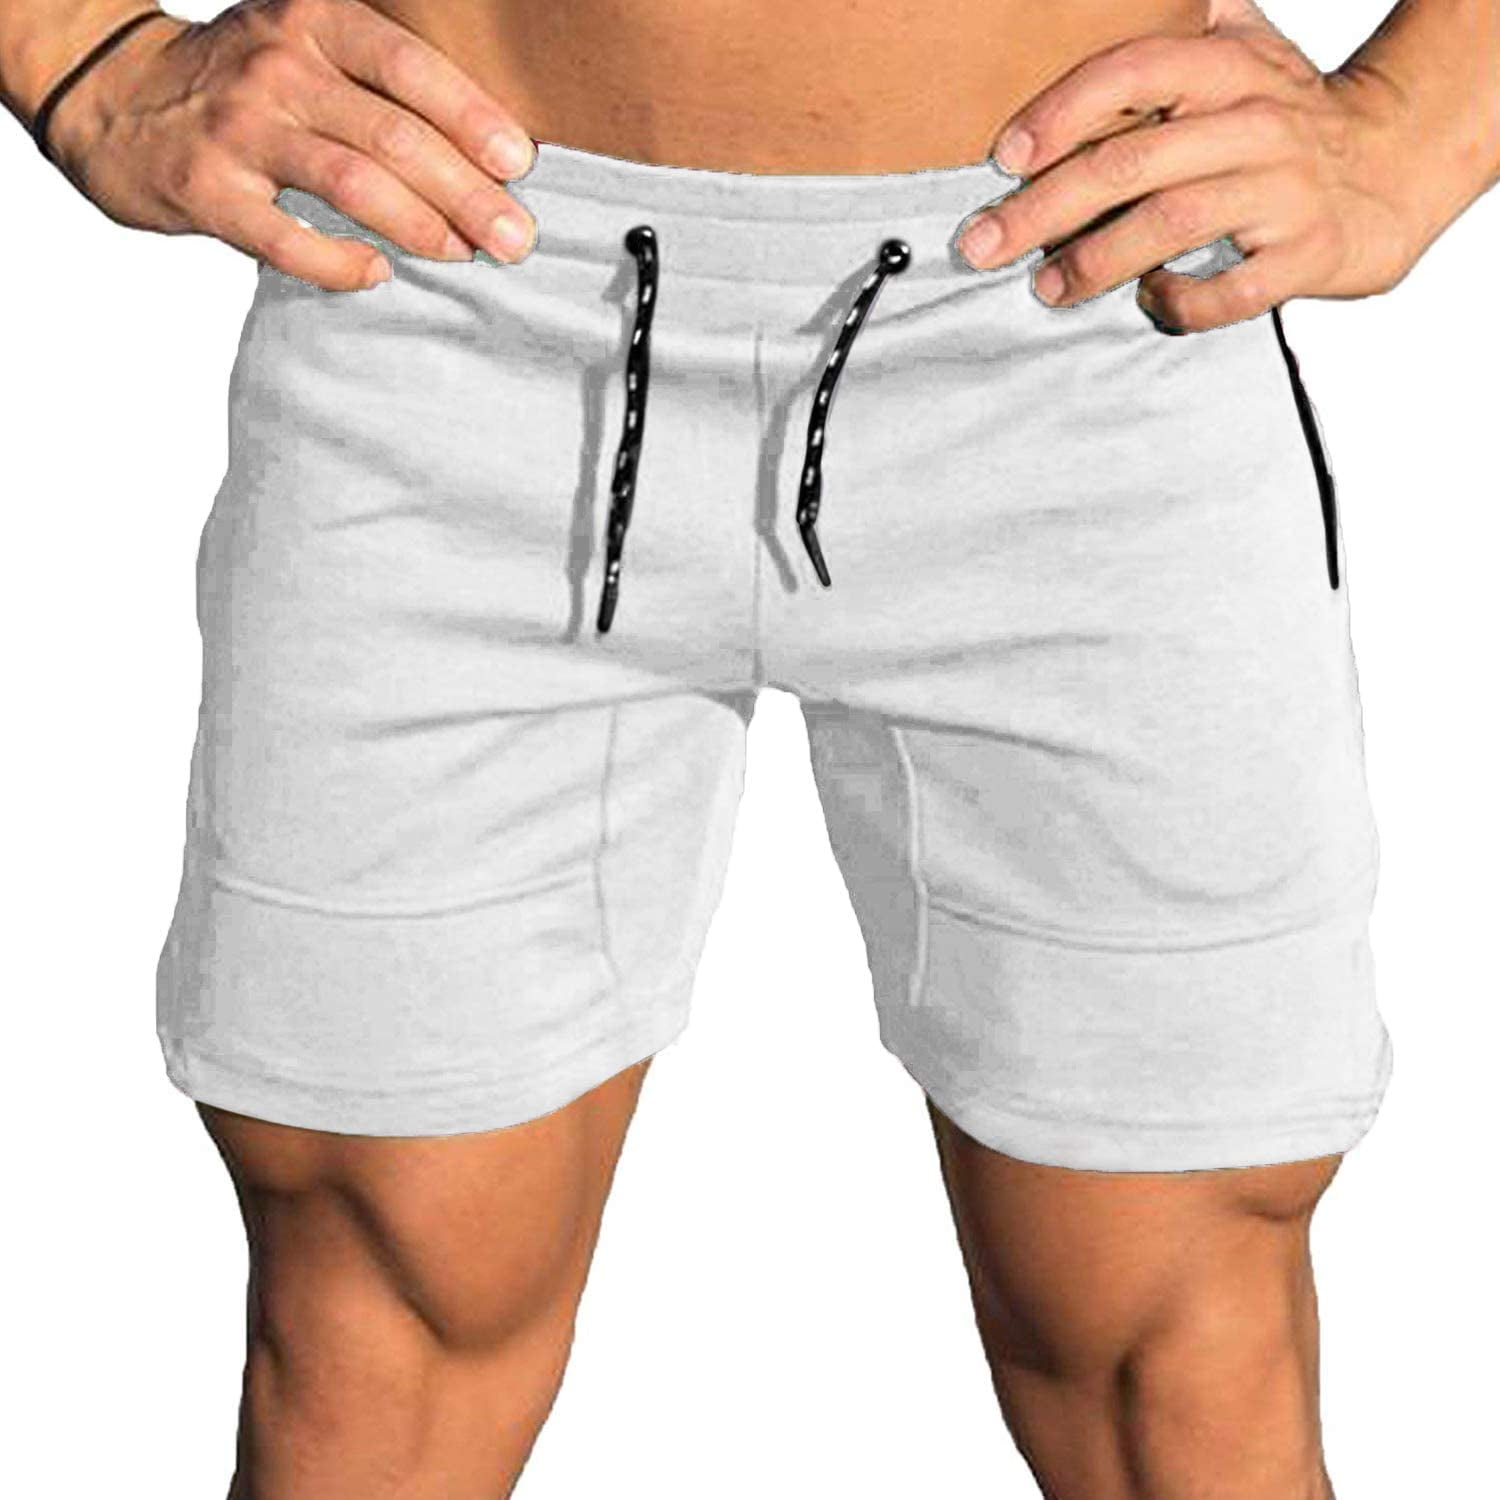 COOFANDY Men's Gym Workout Shorts Weightlifting Squatting Short Fitted Training Bodybuilding Jogger with Pocket